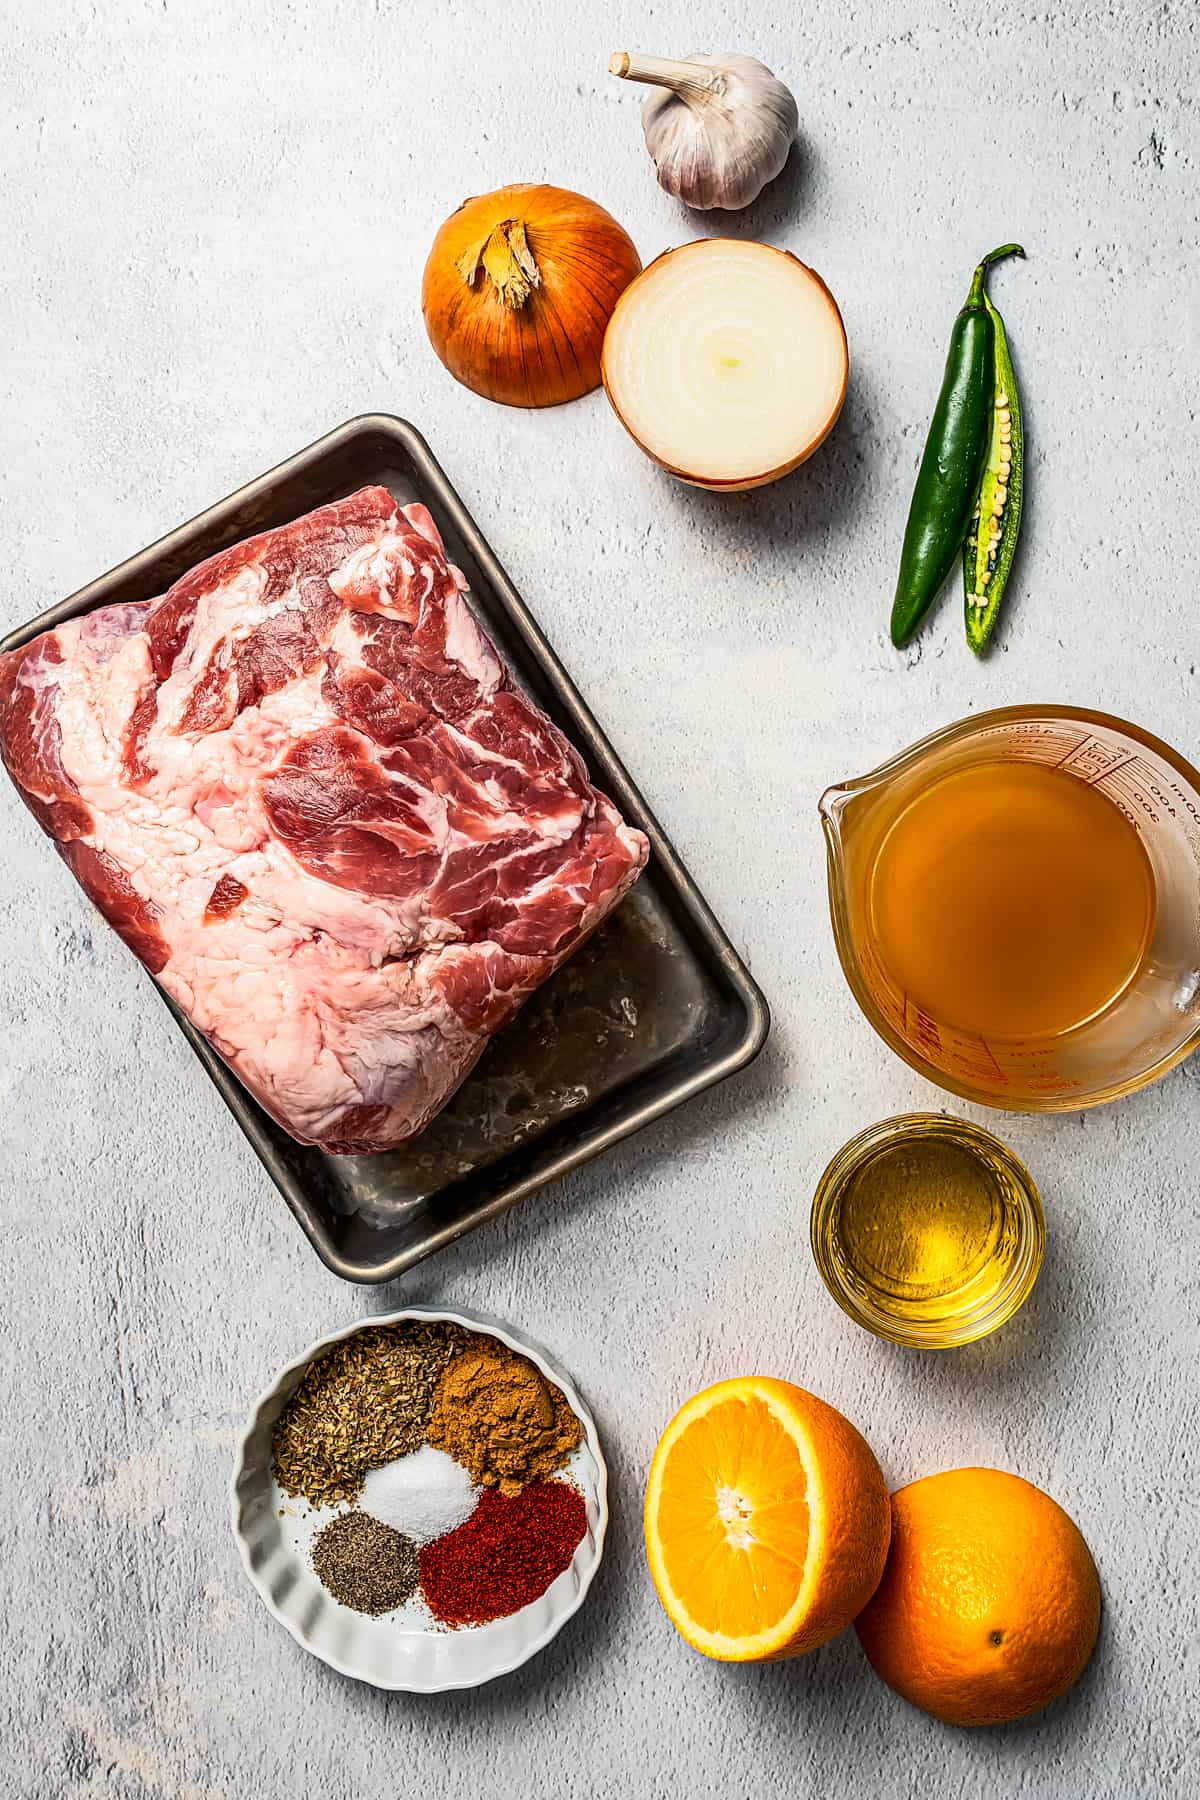 Ingredients for Pernil, pictured from top: Garlic, onion, chili peppers, pork shoulder, broth, seasonings, oil, oranges.